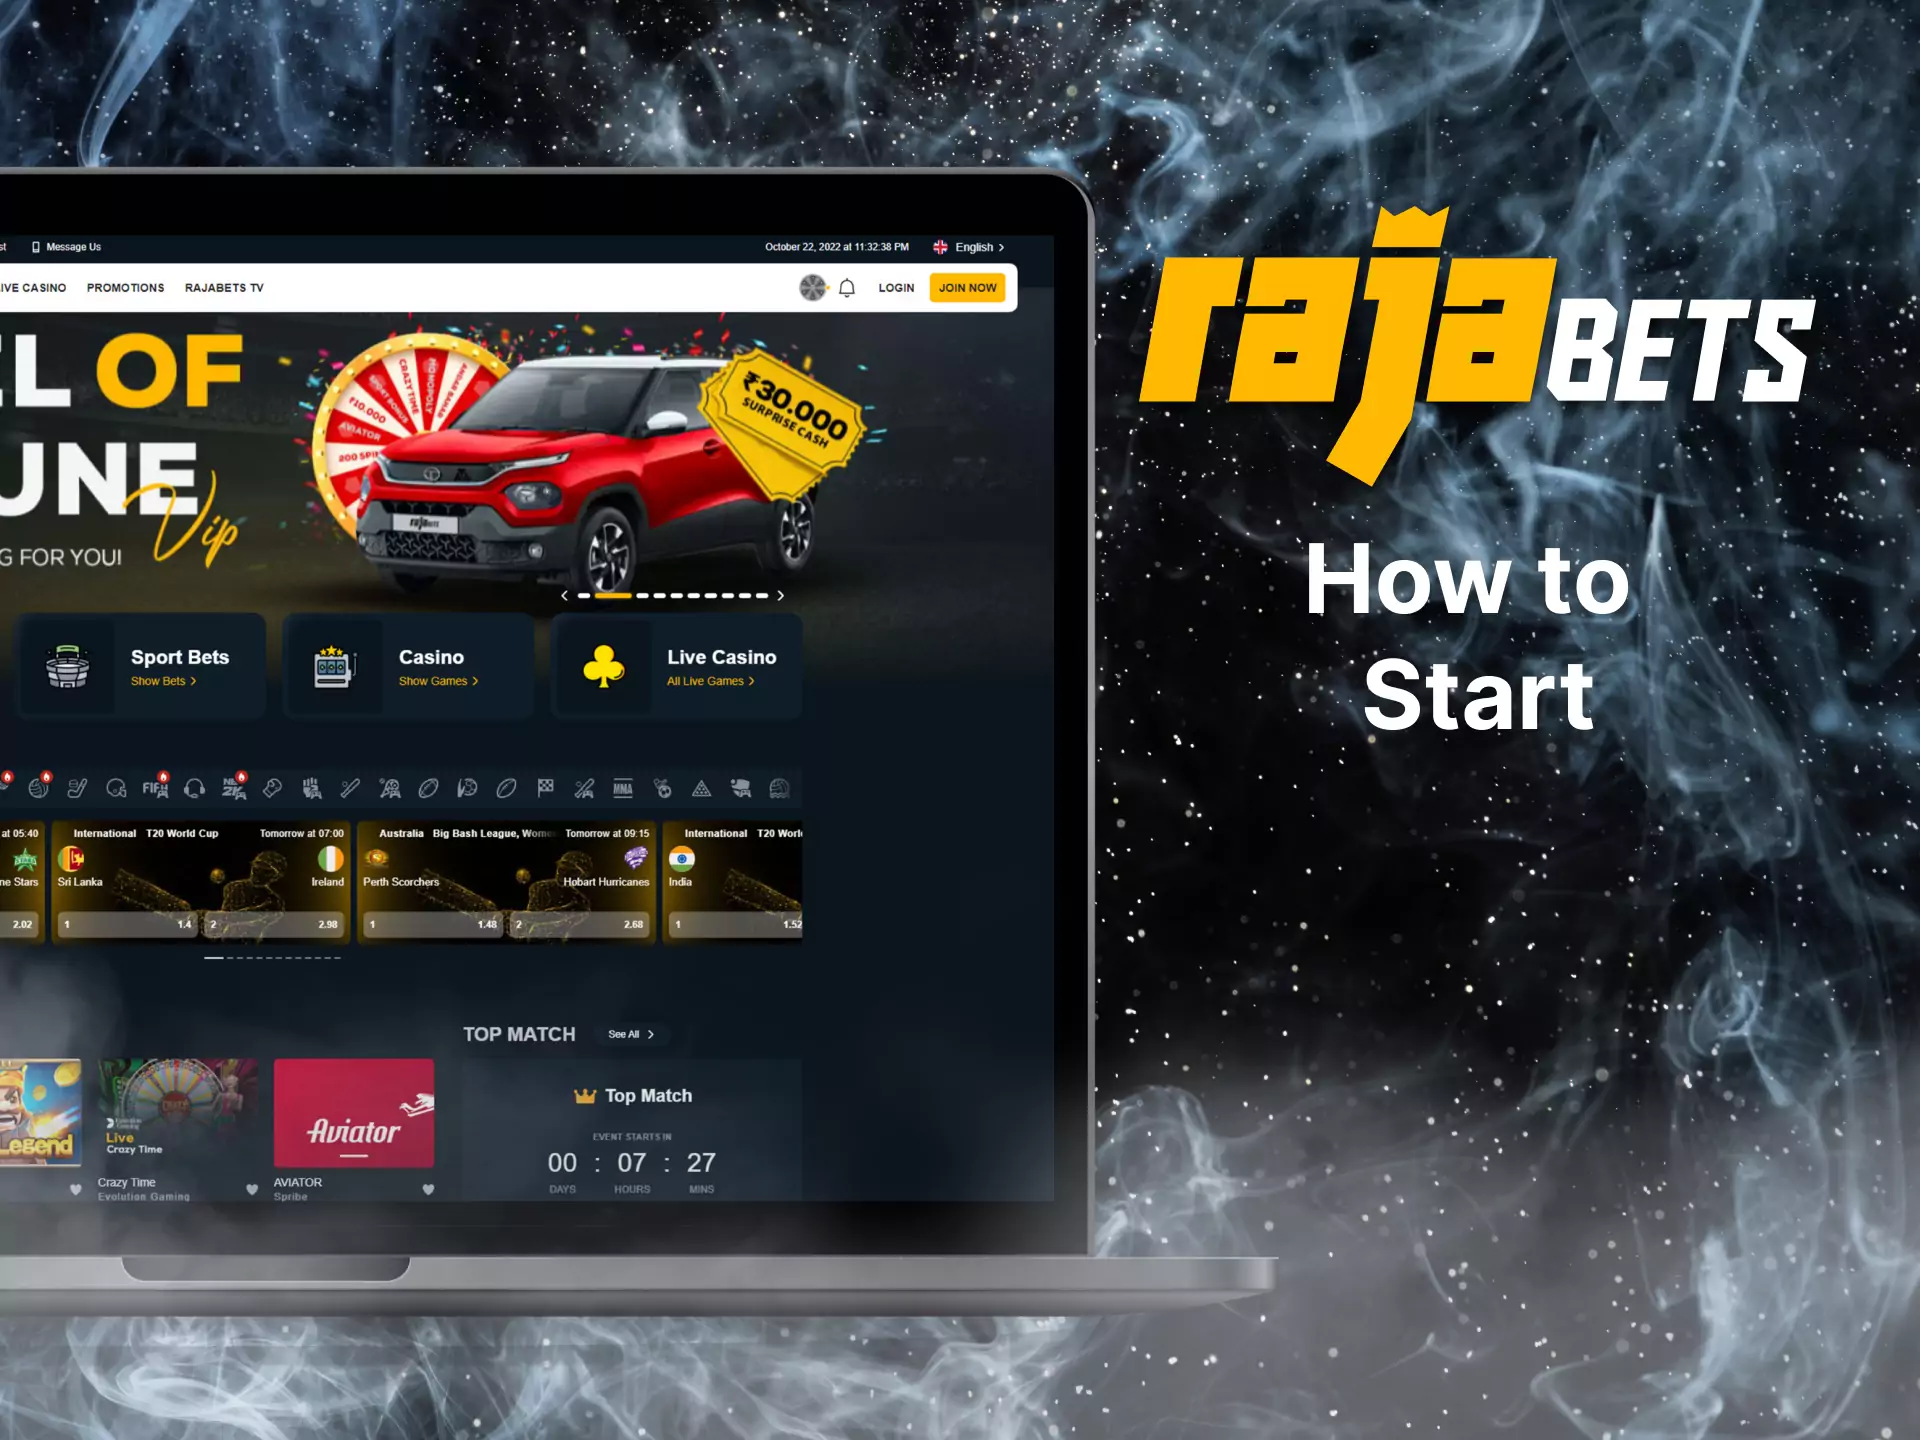 With this instruction, start playing and winning with Rajabets.